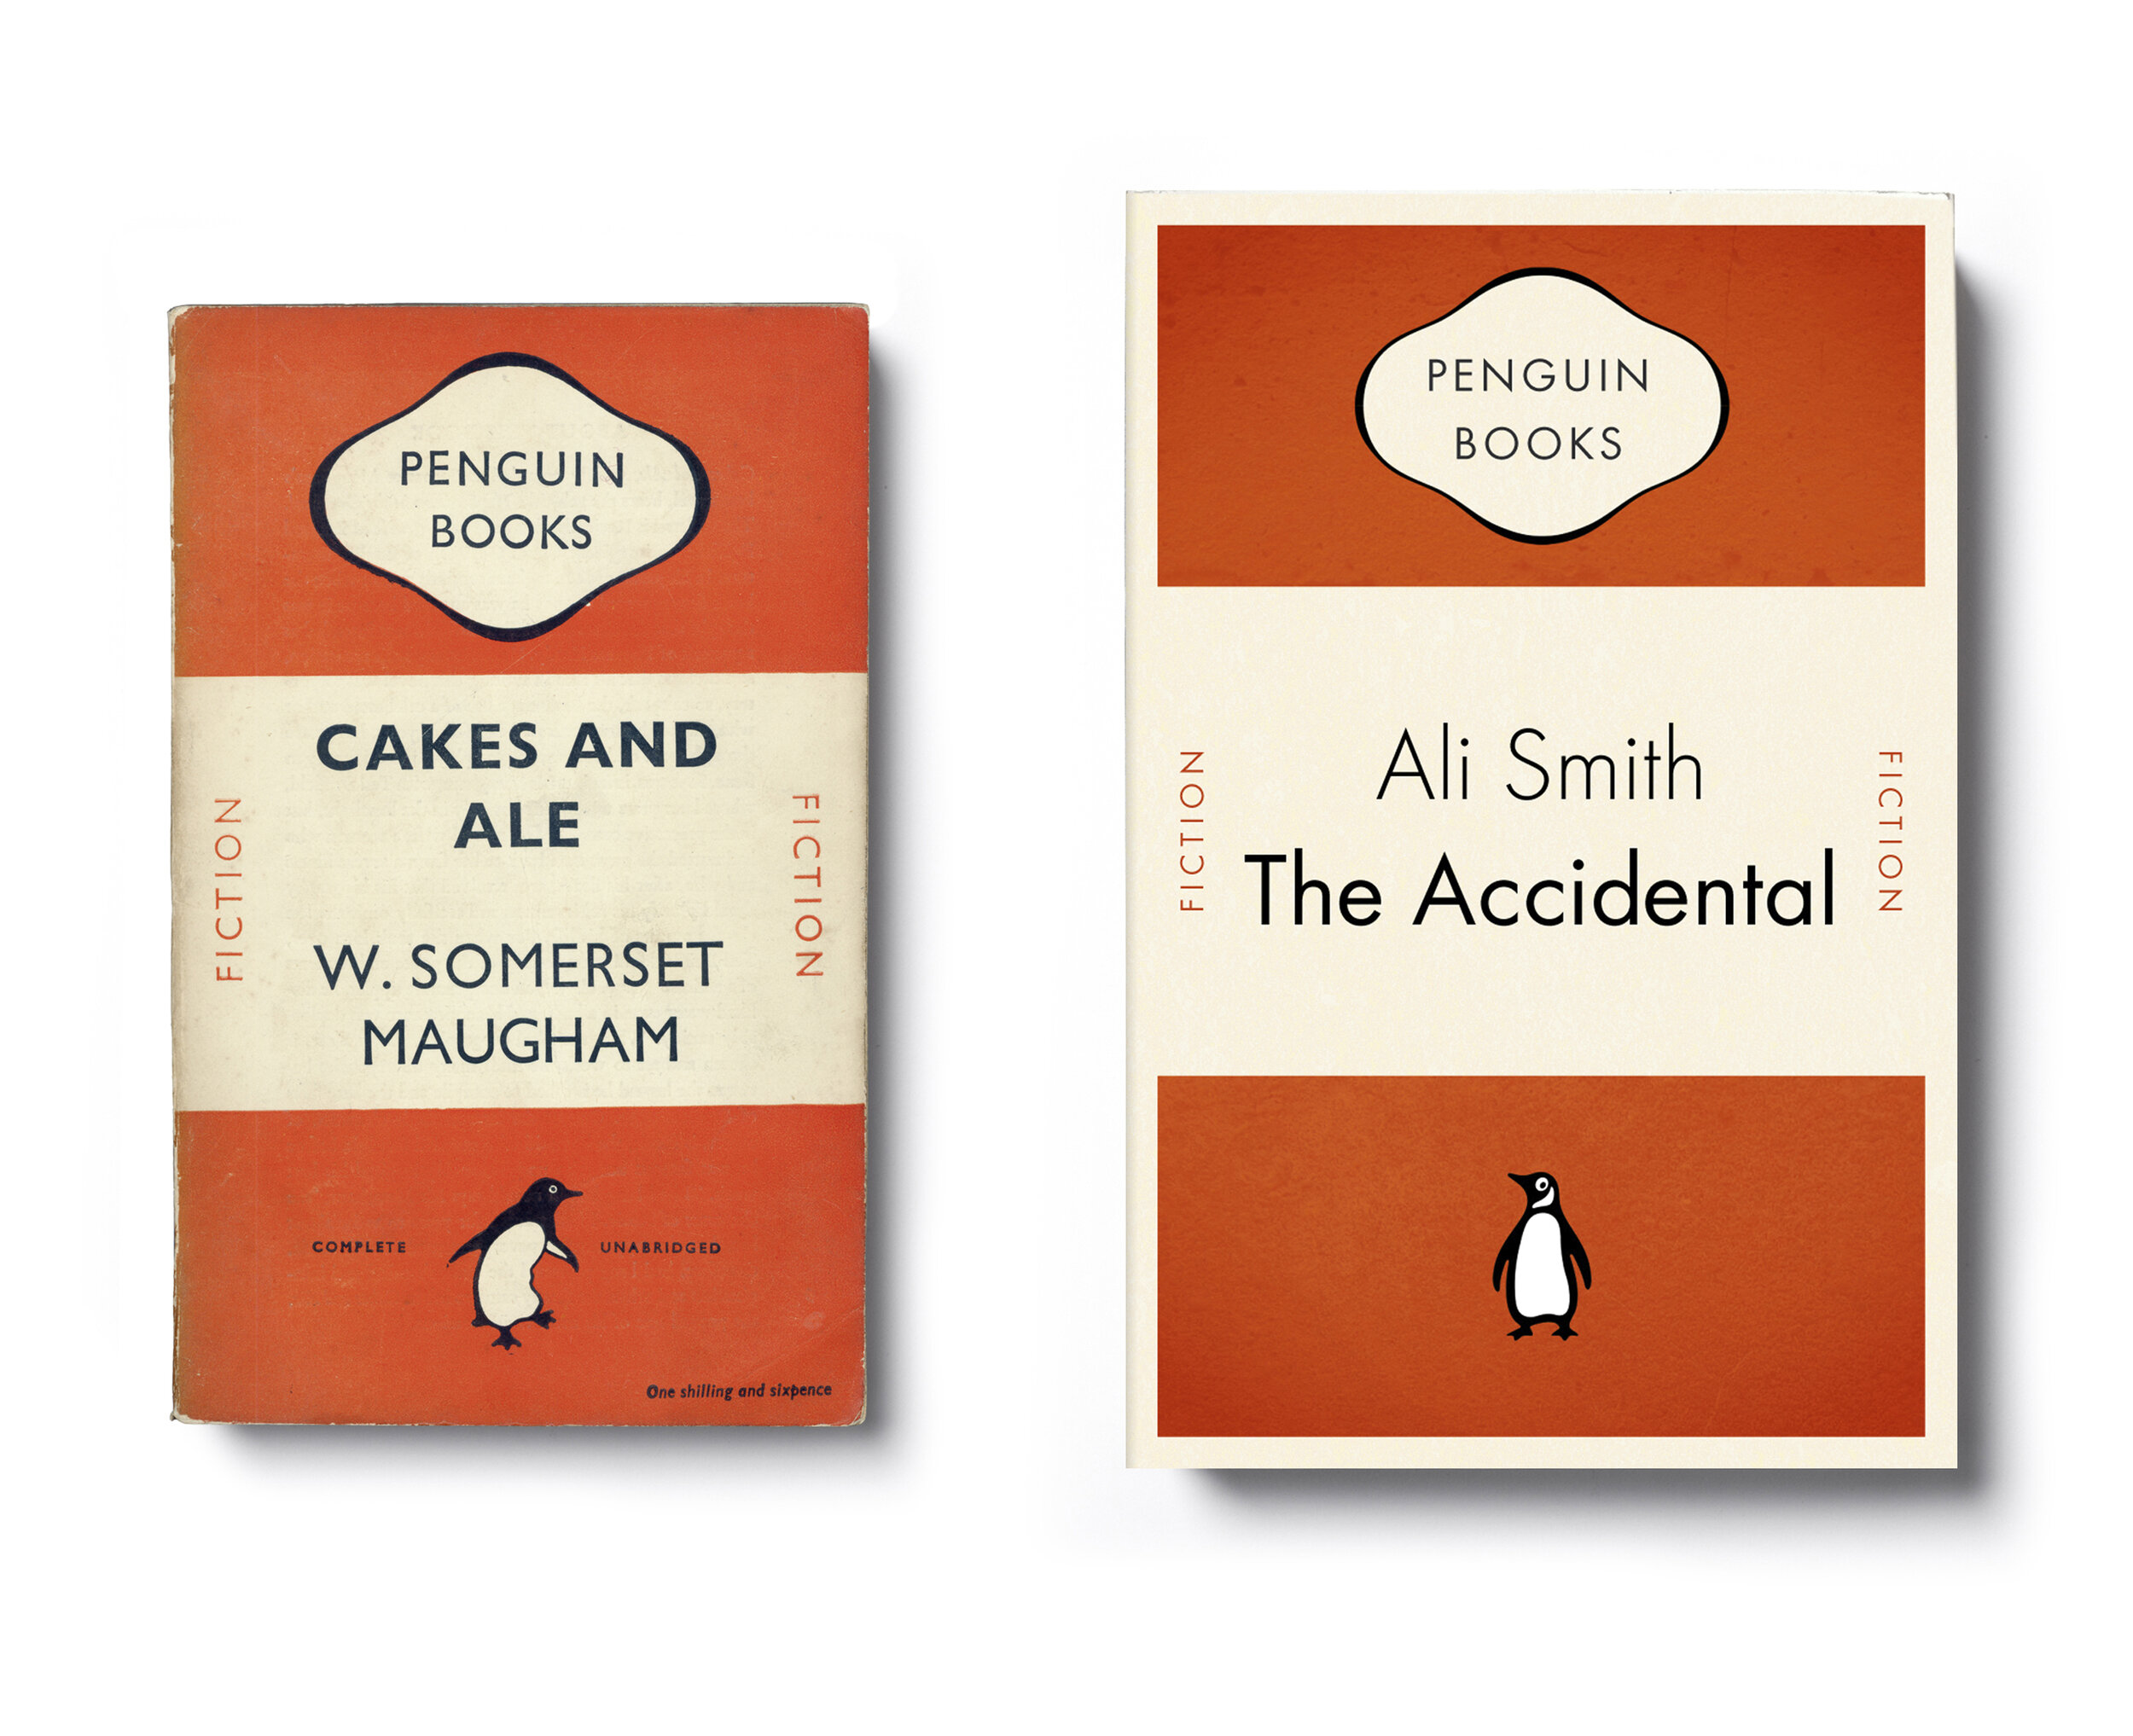  “If now was then” – (left) 1935-1950 ‘A’-format Penguin Book Design: Edward Young – (right) 2008 ‘B’-format reworked ‘Penguin Celebrations’ promotional series Design: Jim Stoddart 